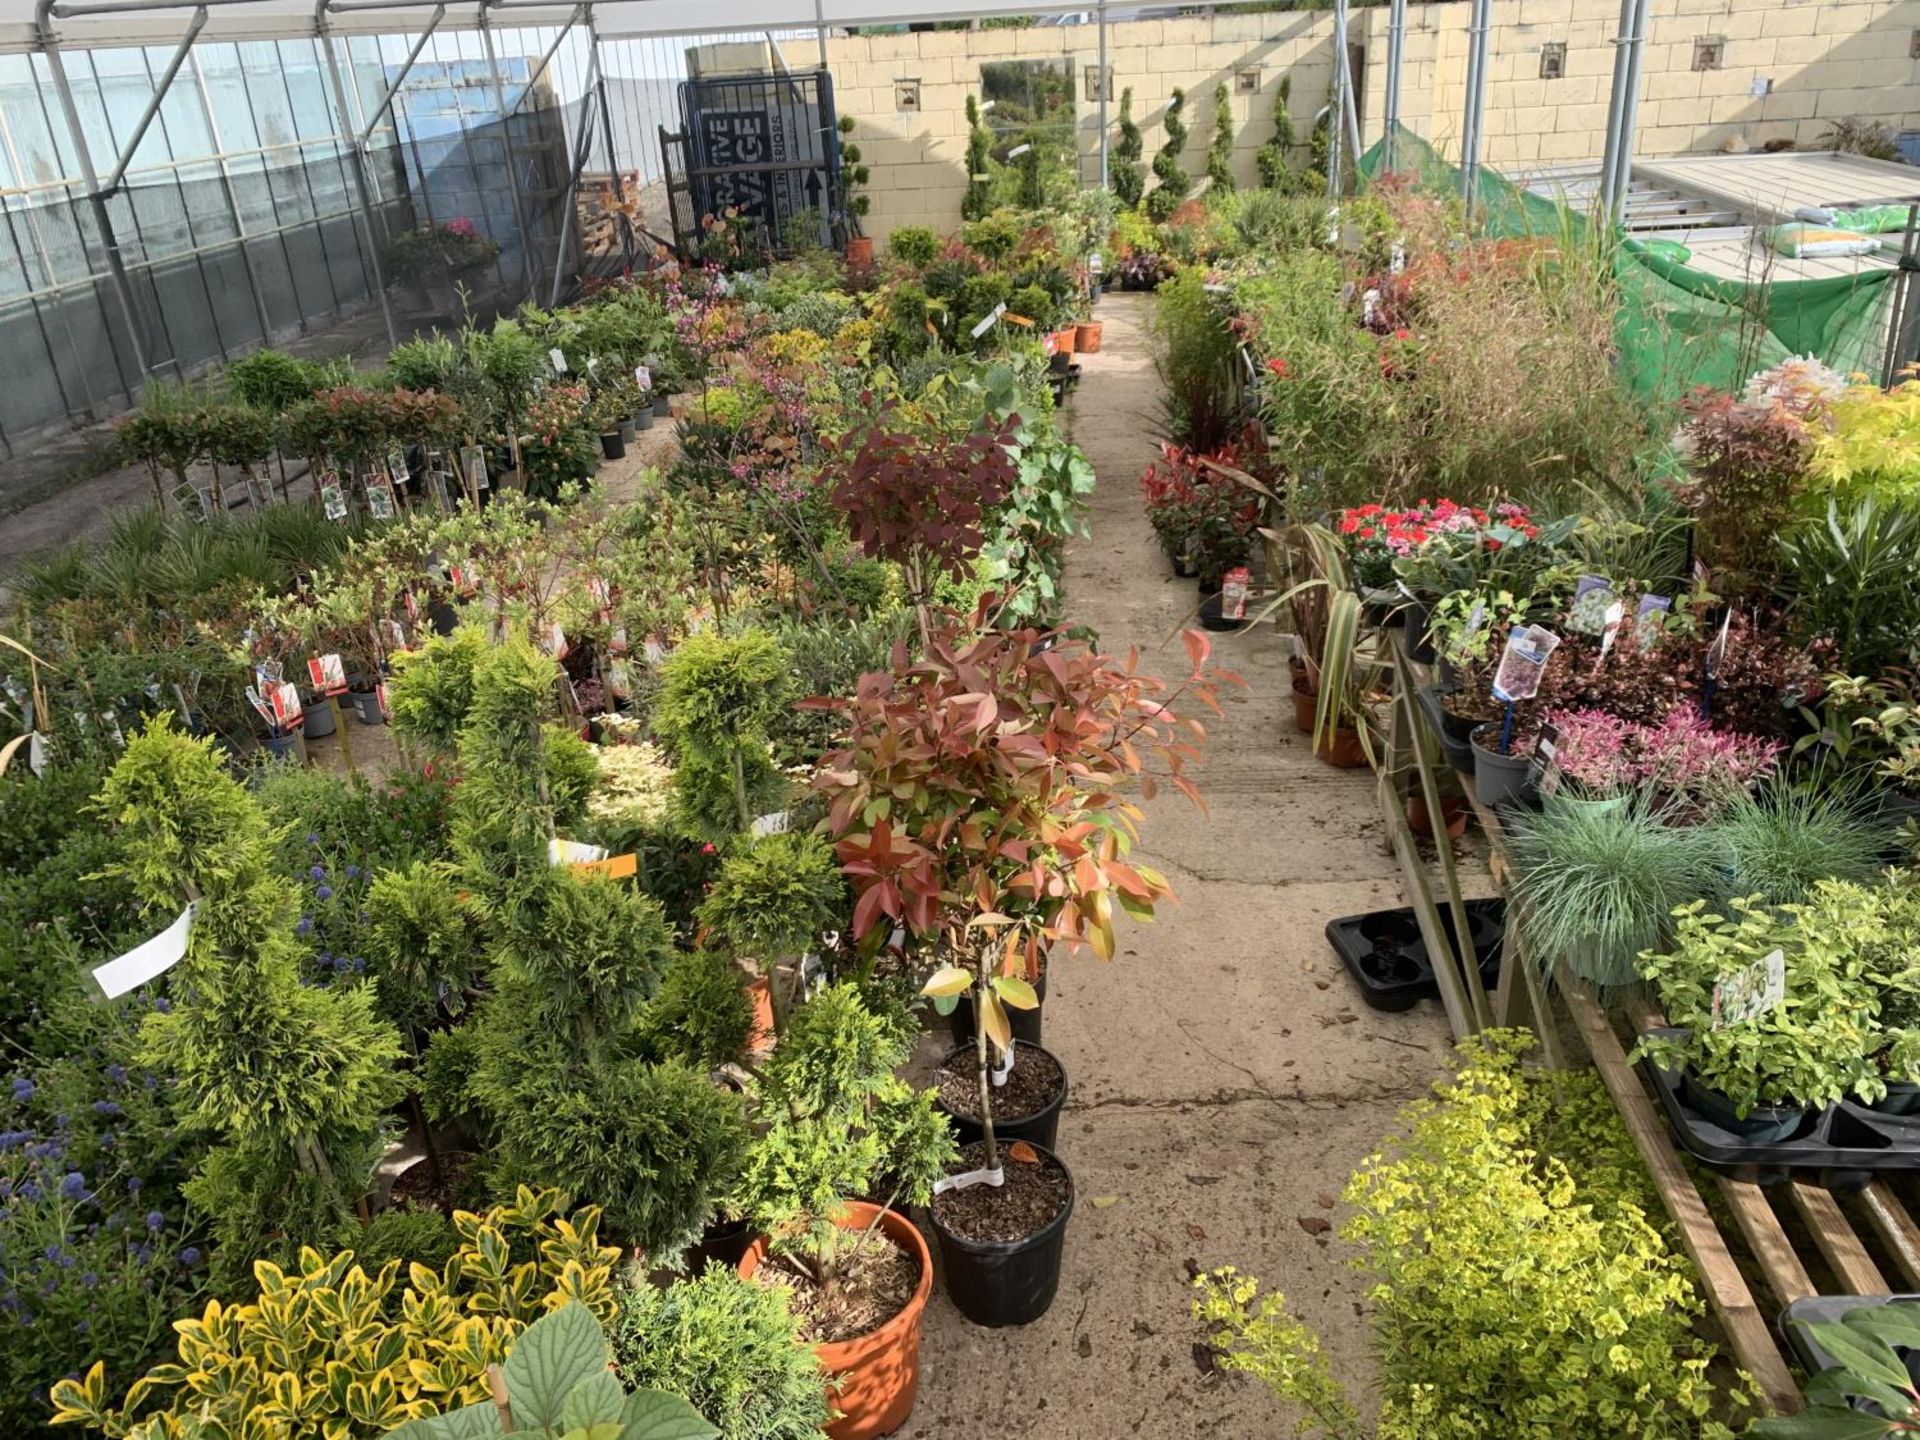 WELCOME TO ASHLEY WALLER HORTICULTURE AUCTION - LOTS ARE BEING ADDED DAILY - THE IMAGES SHOW LOTS - Image 22 of 51